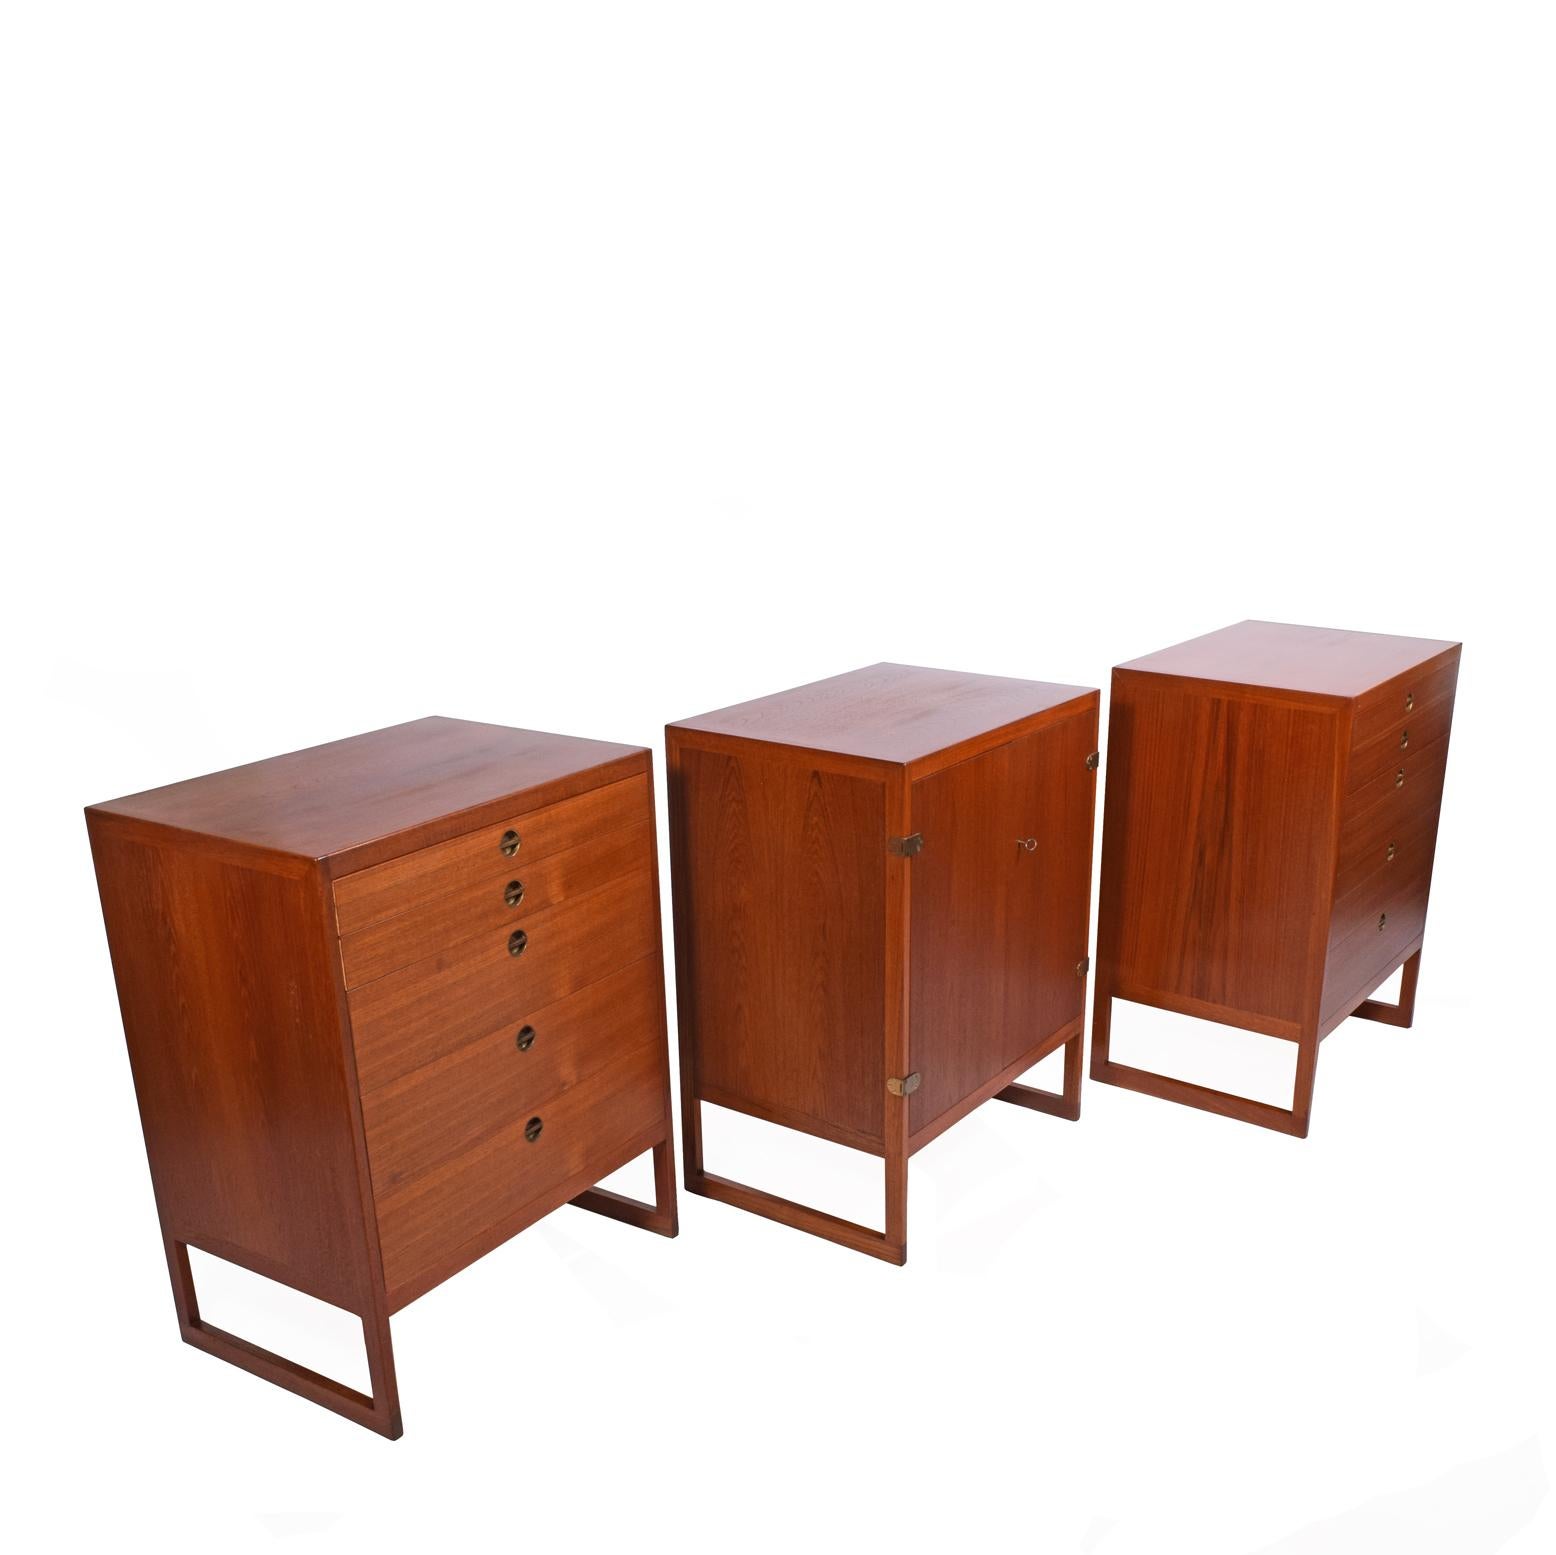 Two chest of drawer SOLD  and one cabinet with two doors in teak made by P.Lauritsen and Son. Model # BM.59 designed in 1957. Literature: “Mobilia”, 1957.